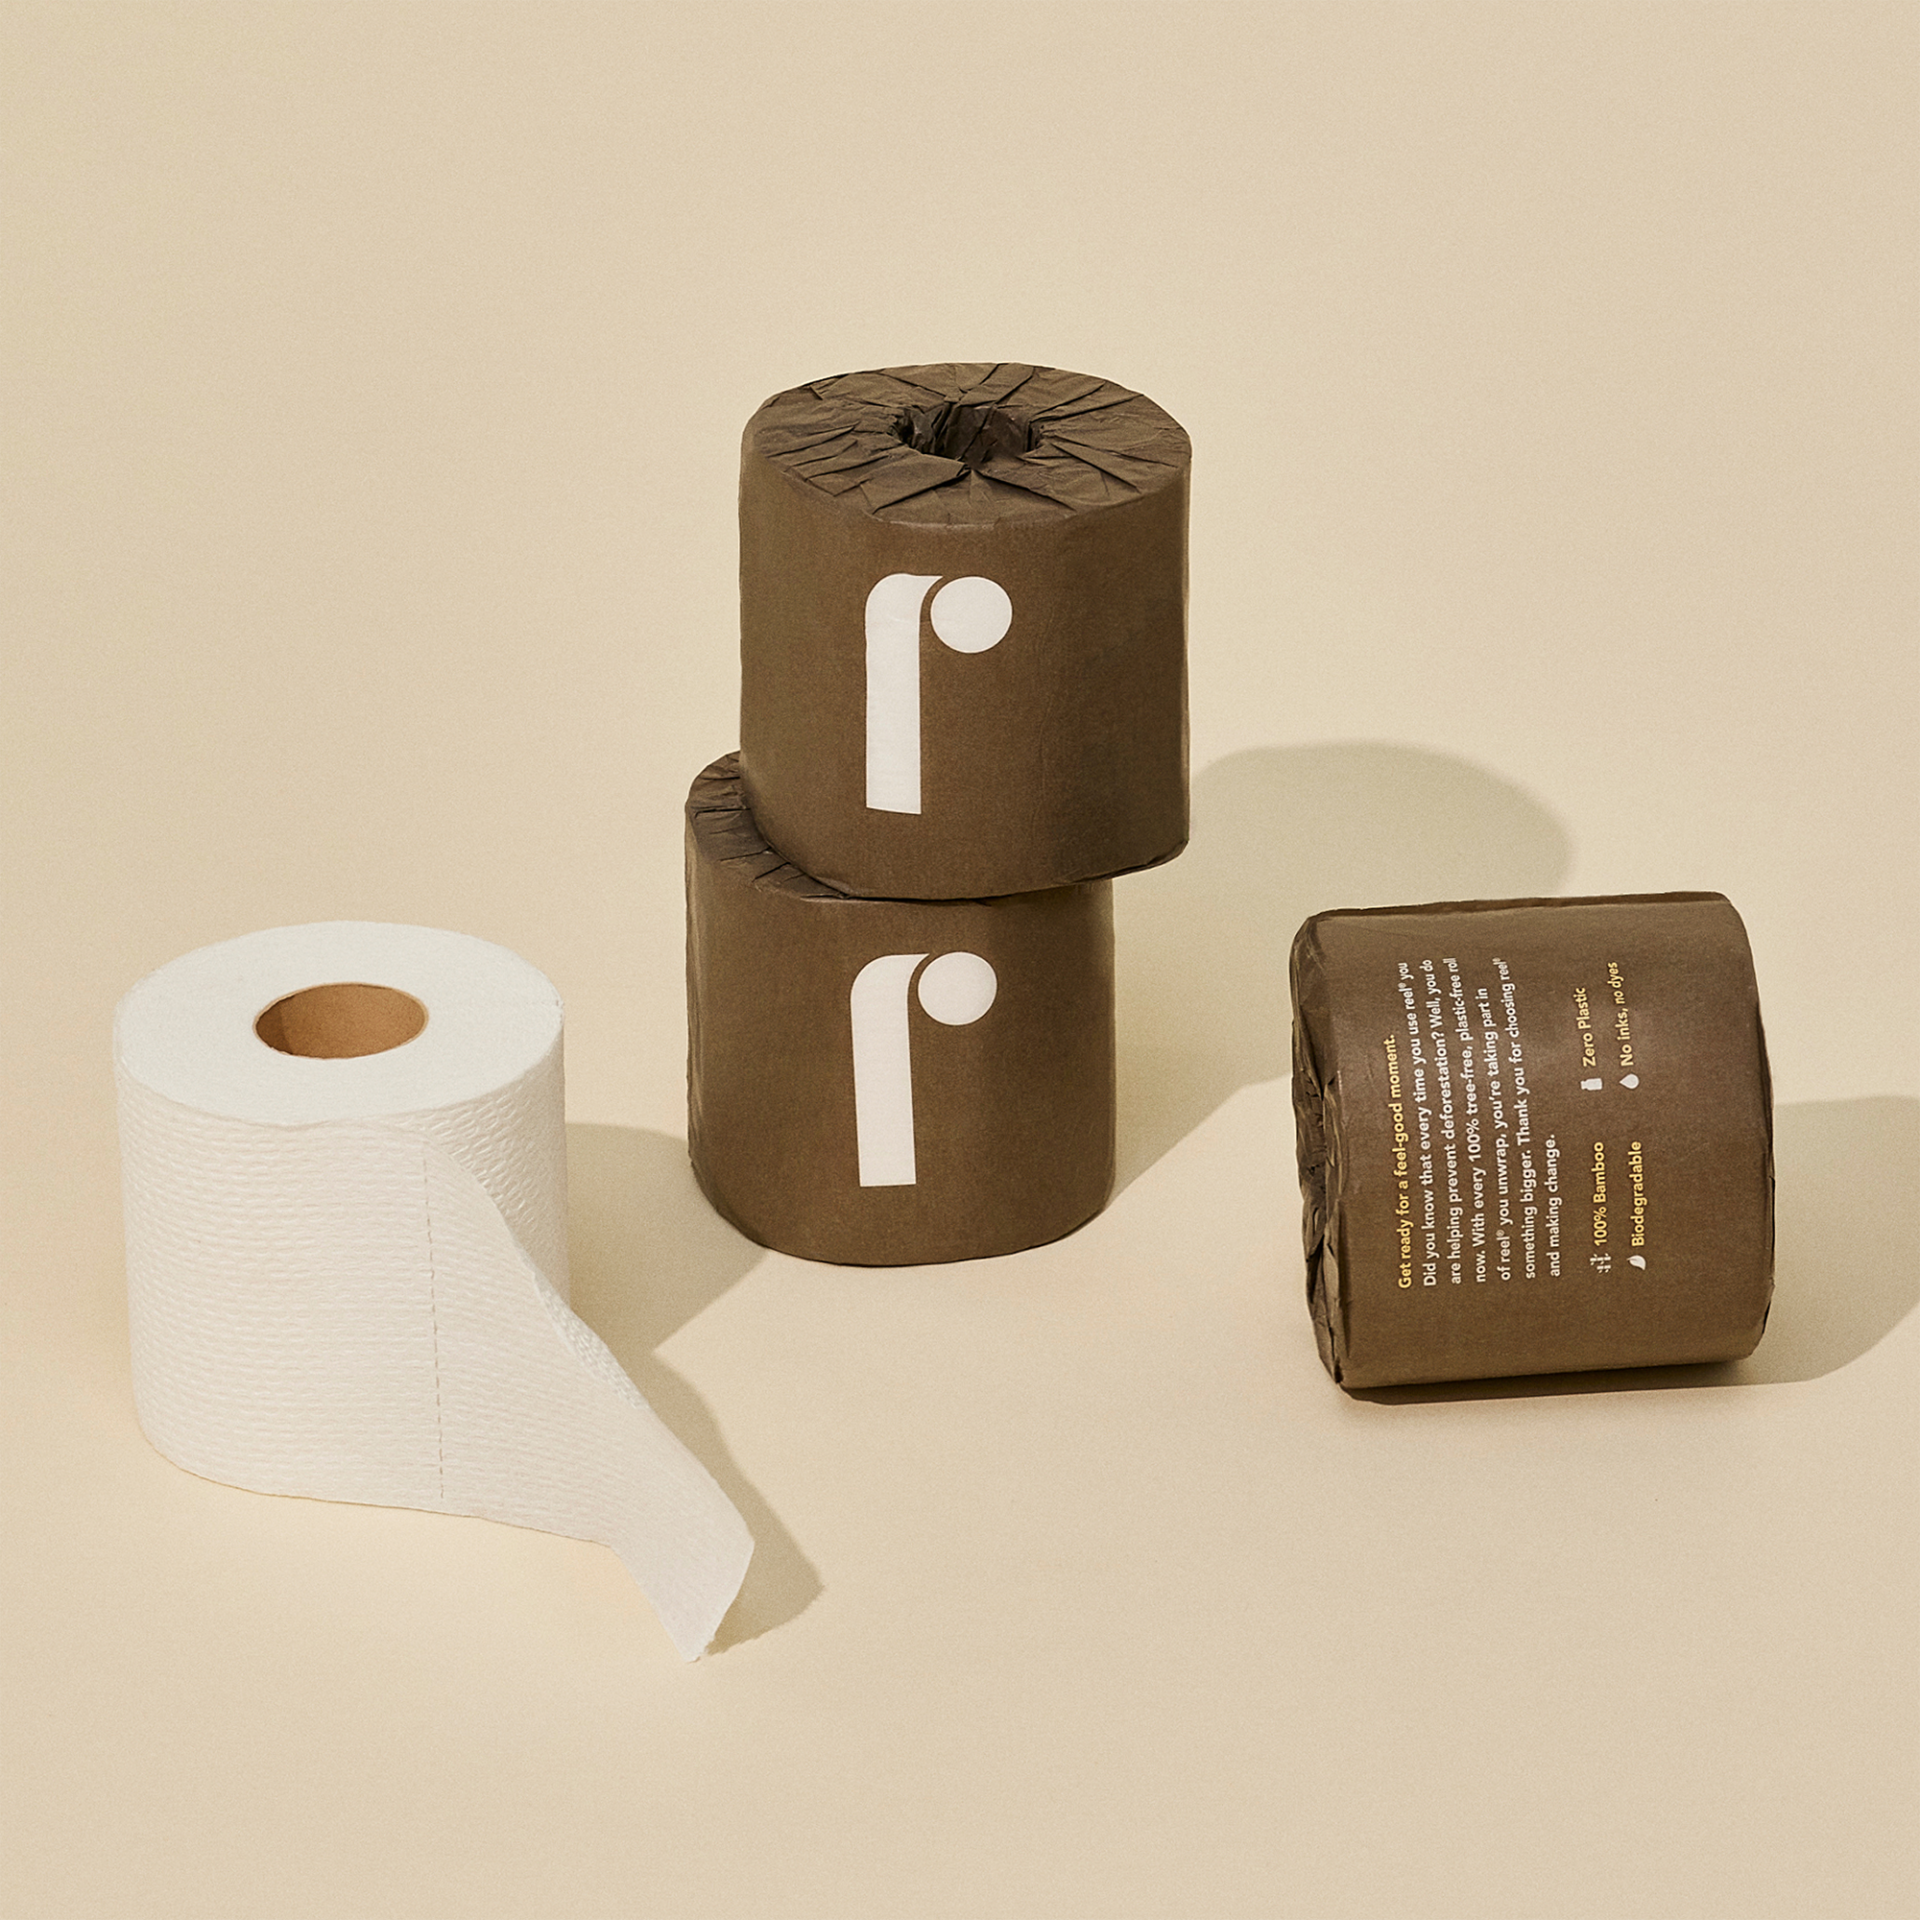 Reel Bamboo Toilet Paper: Tree-free and planet-friendly, one roll is shown out of packaging and thee rolls are shown in brown paper packaging 